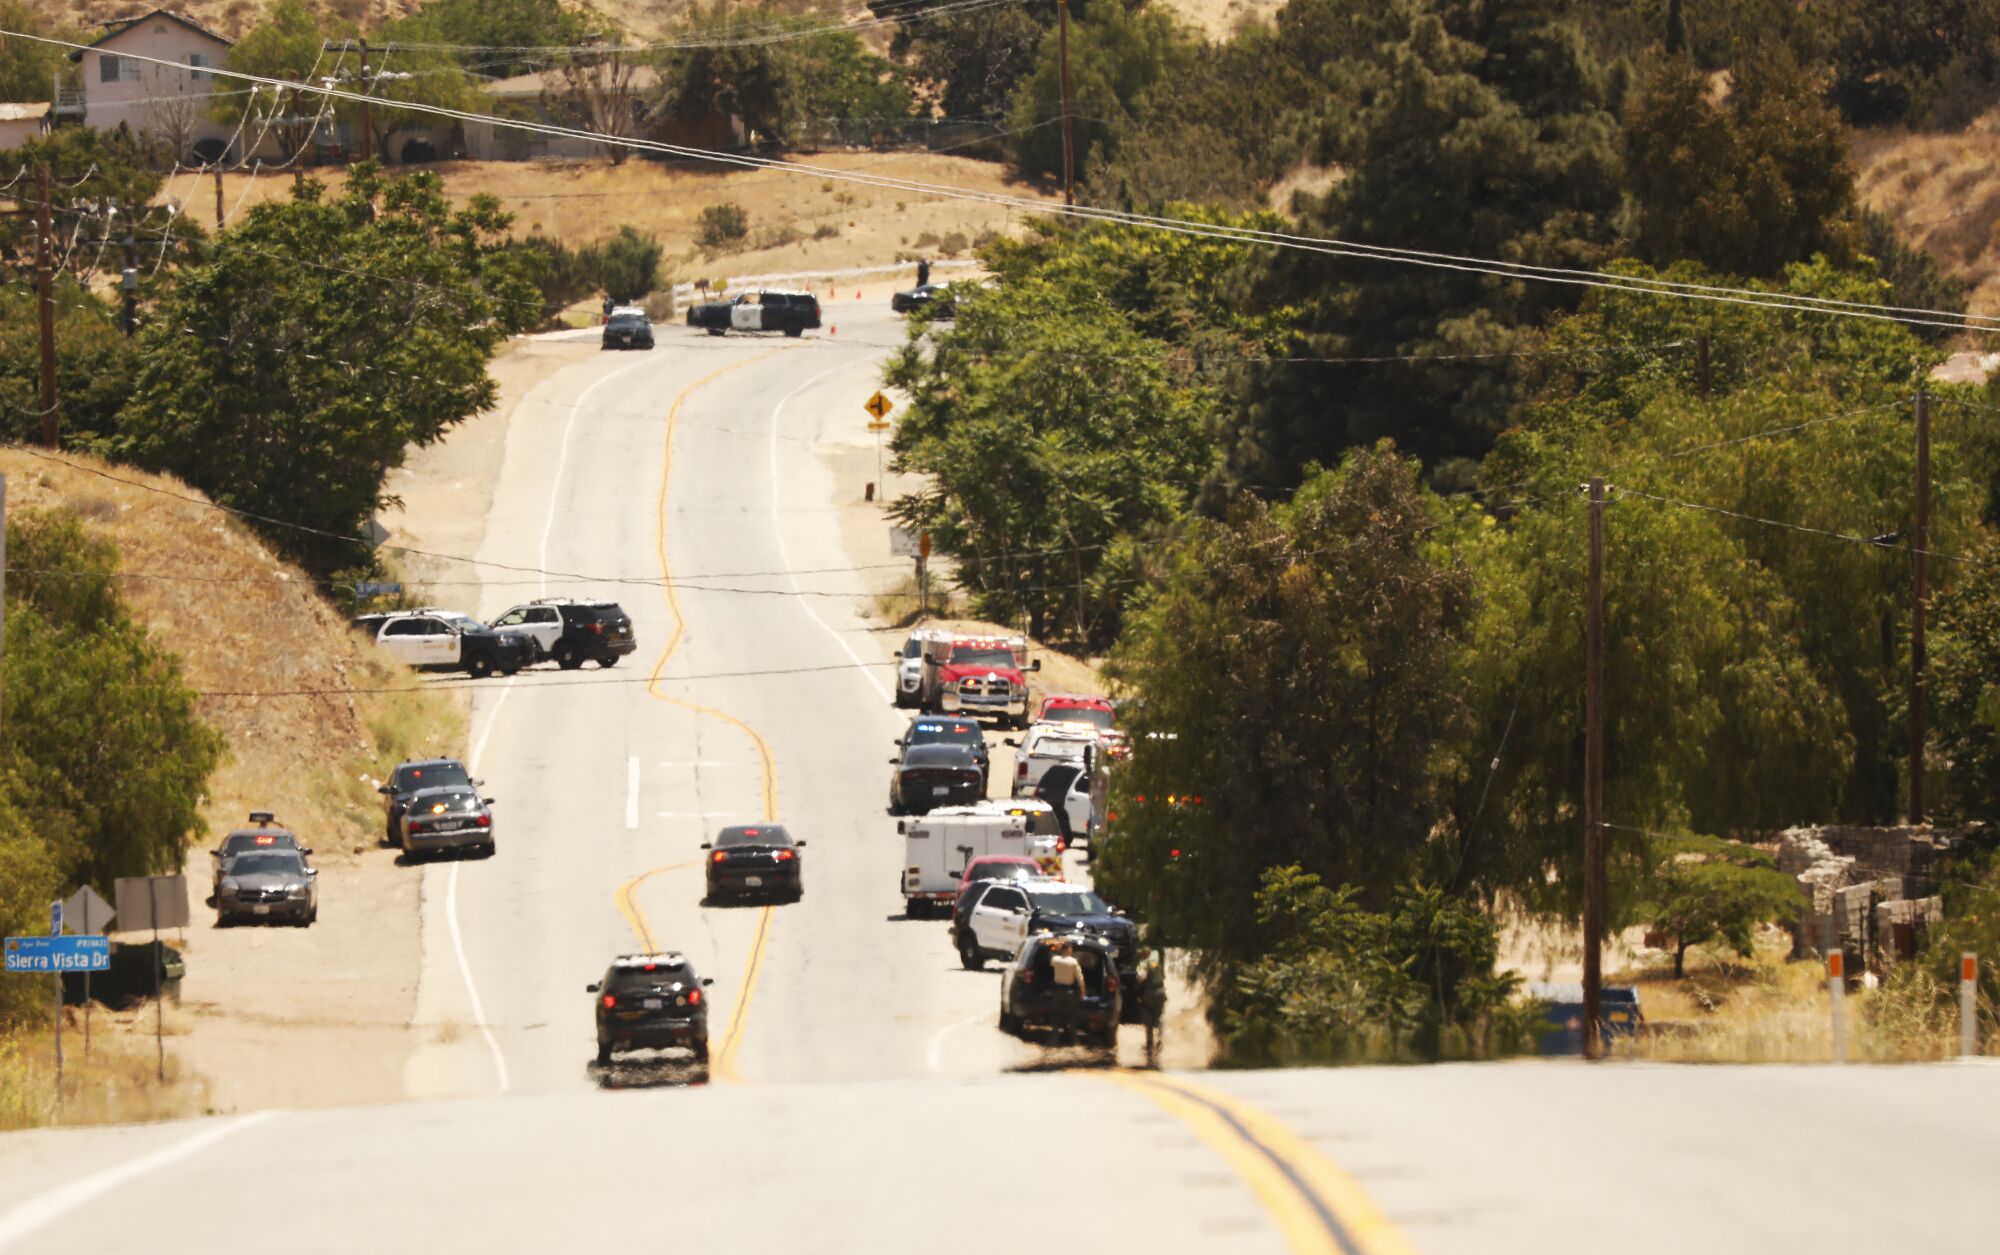 Emergency vehicles line a hilly road.